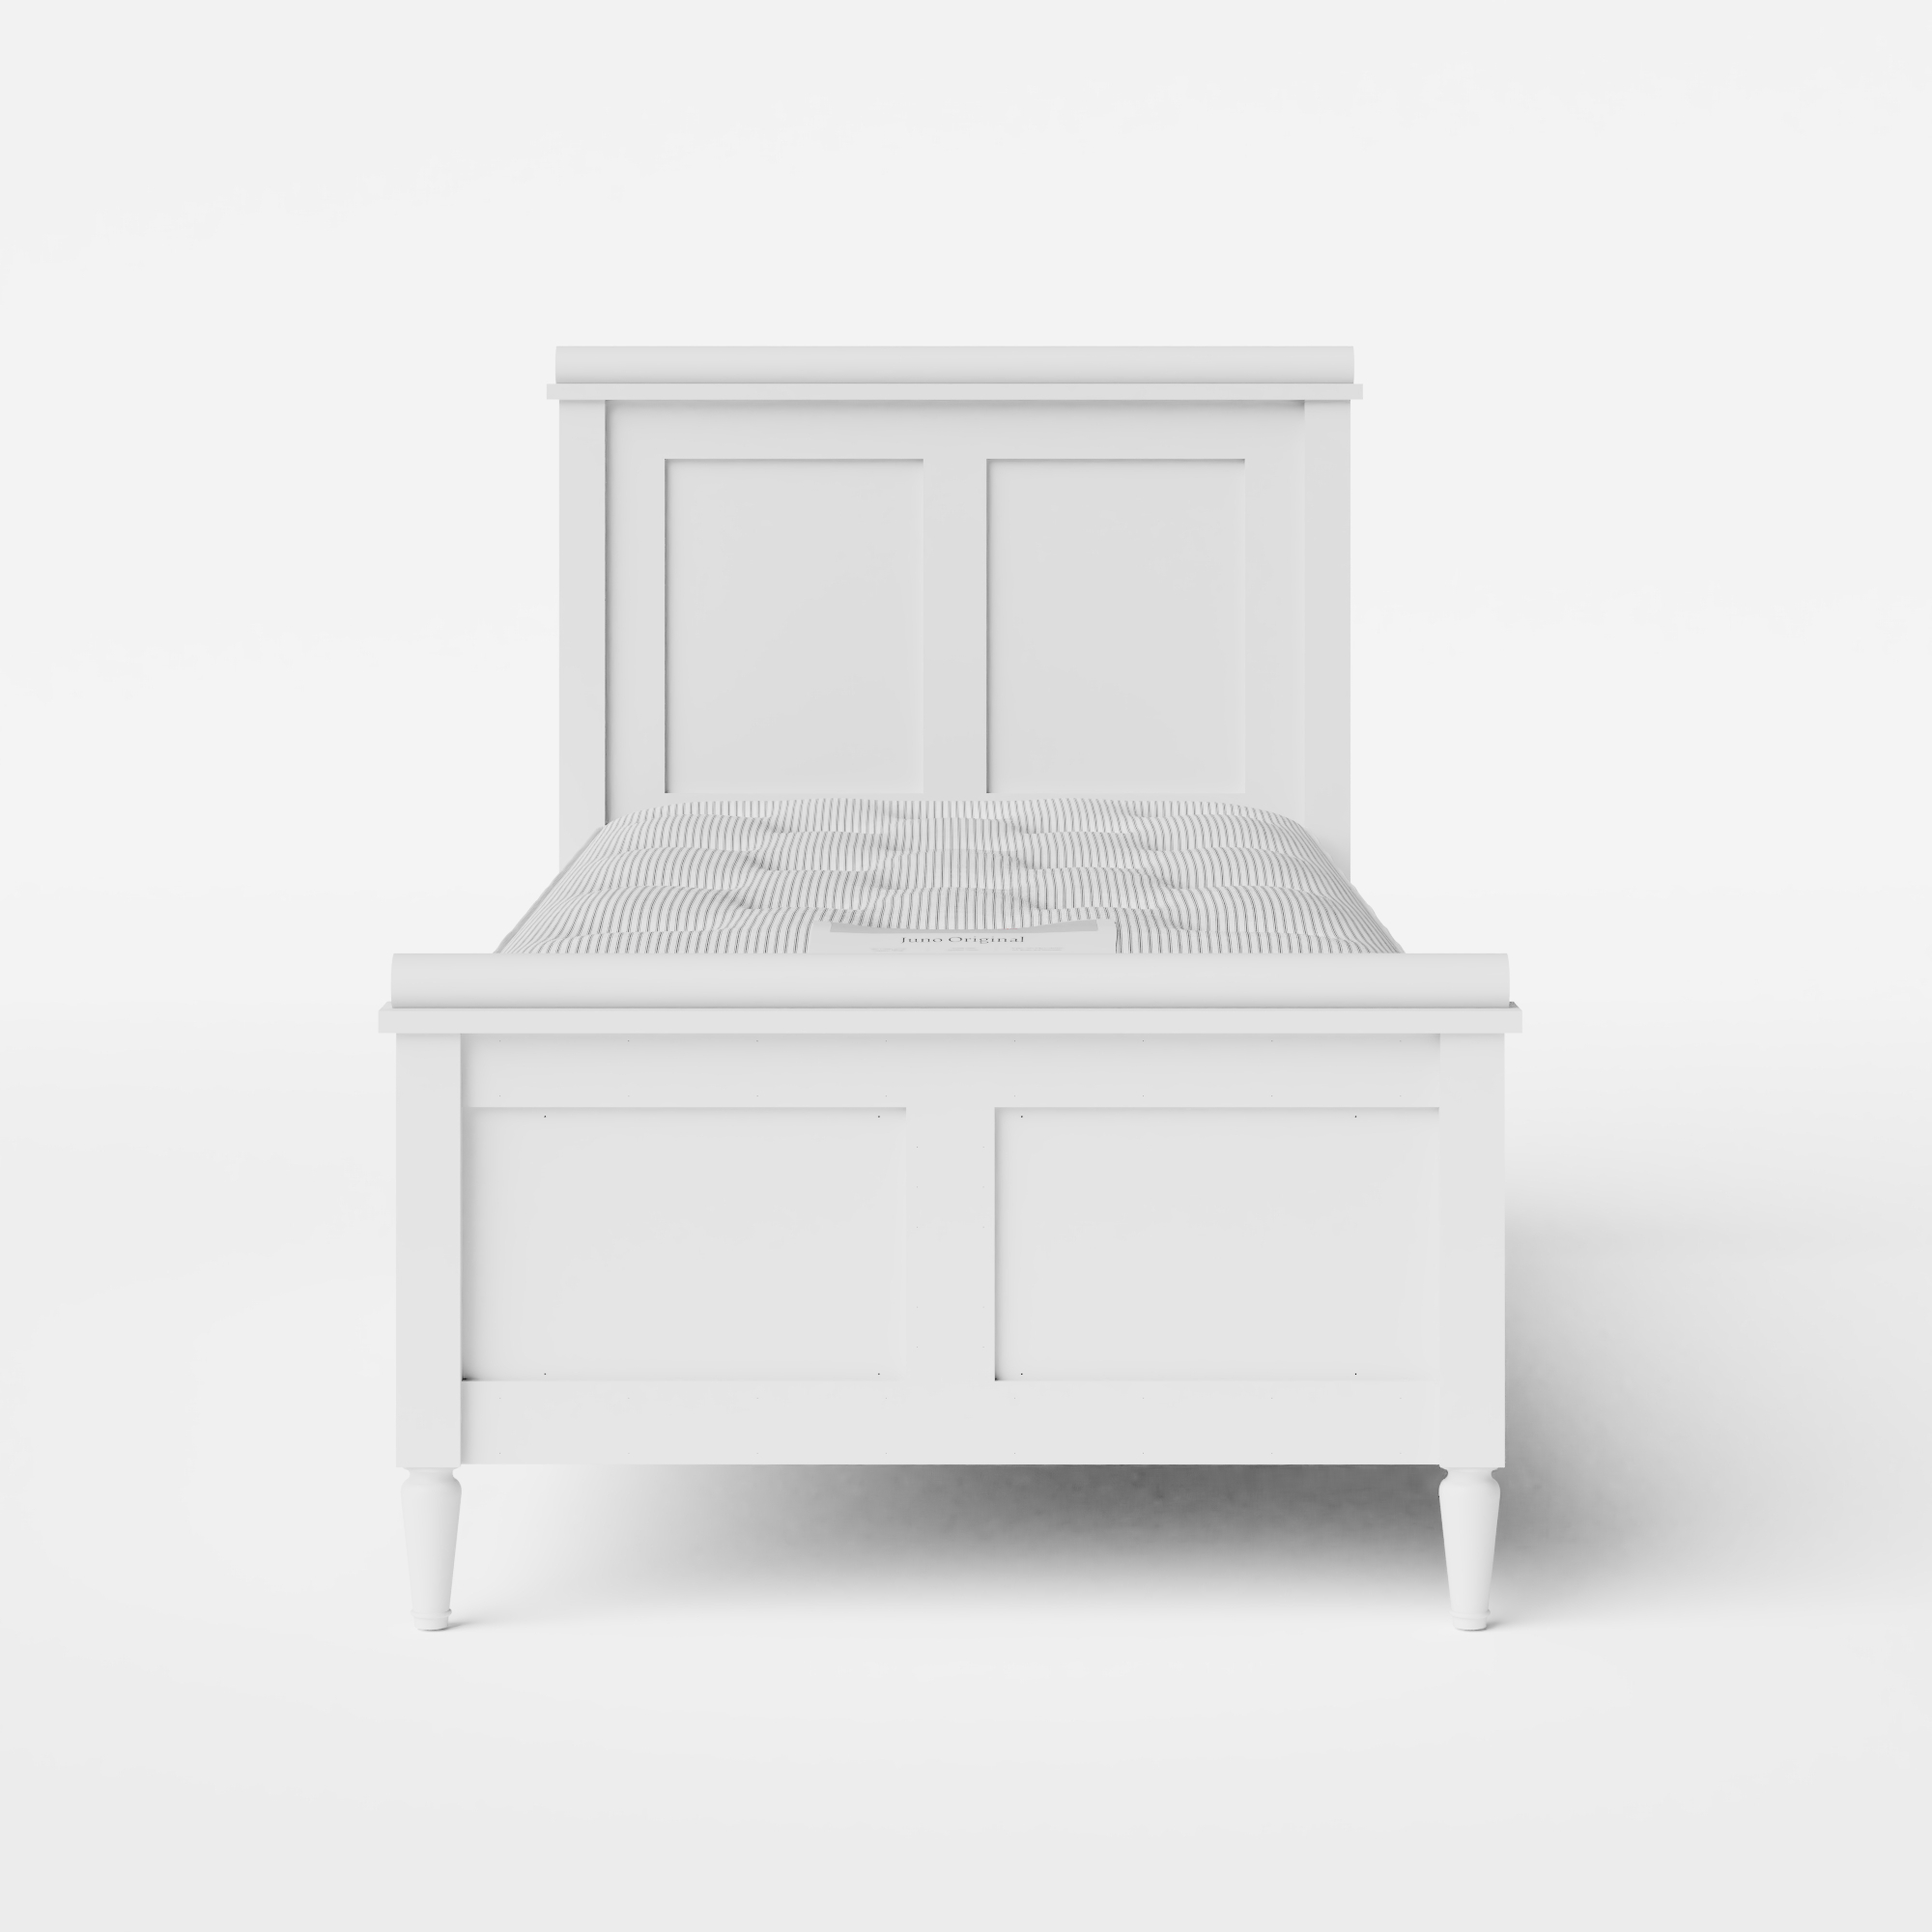 Nocturne Painted single painted wood bed in white with Juno mattress